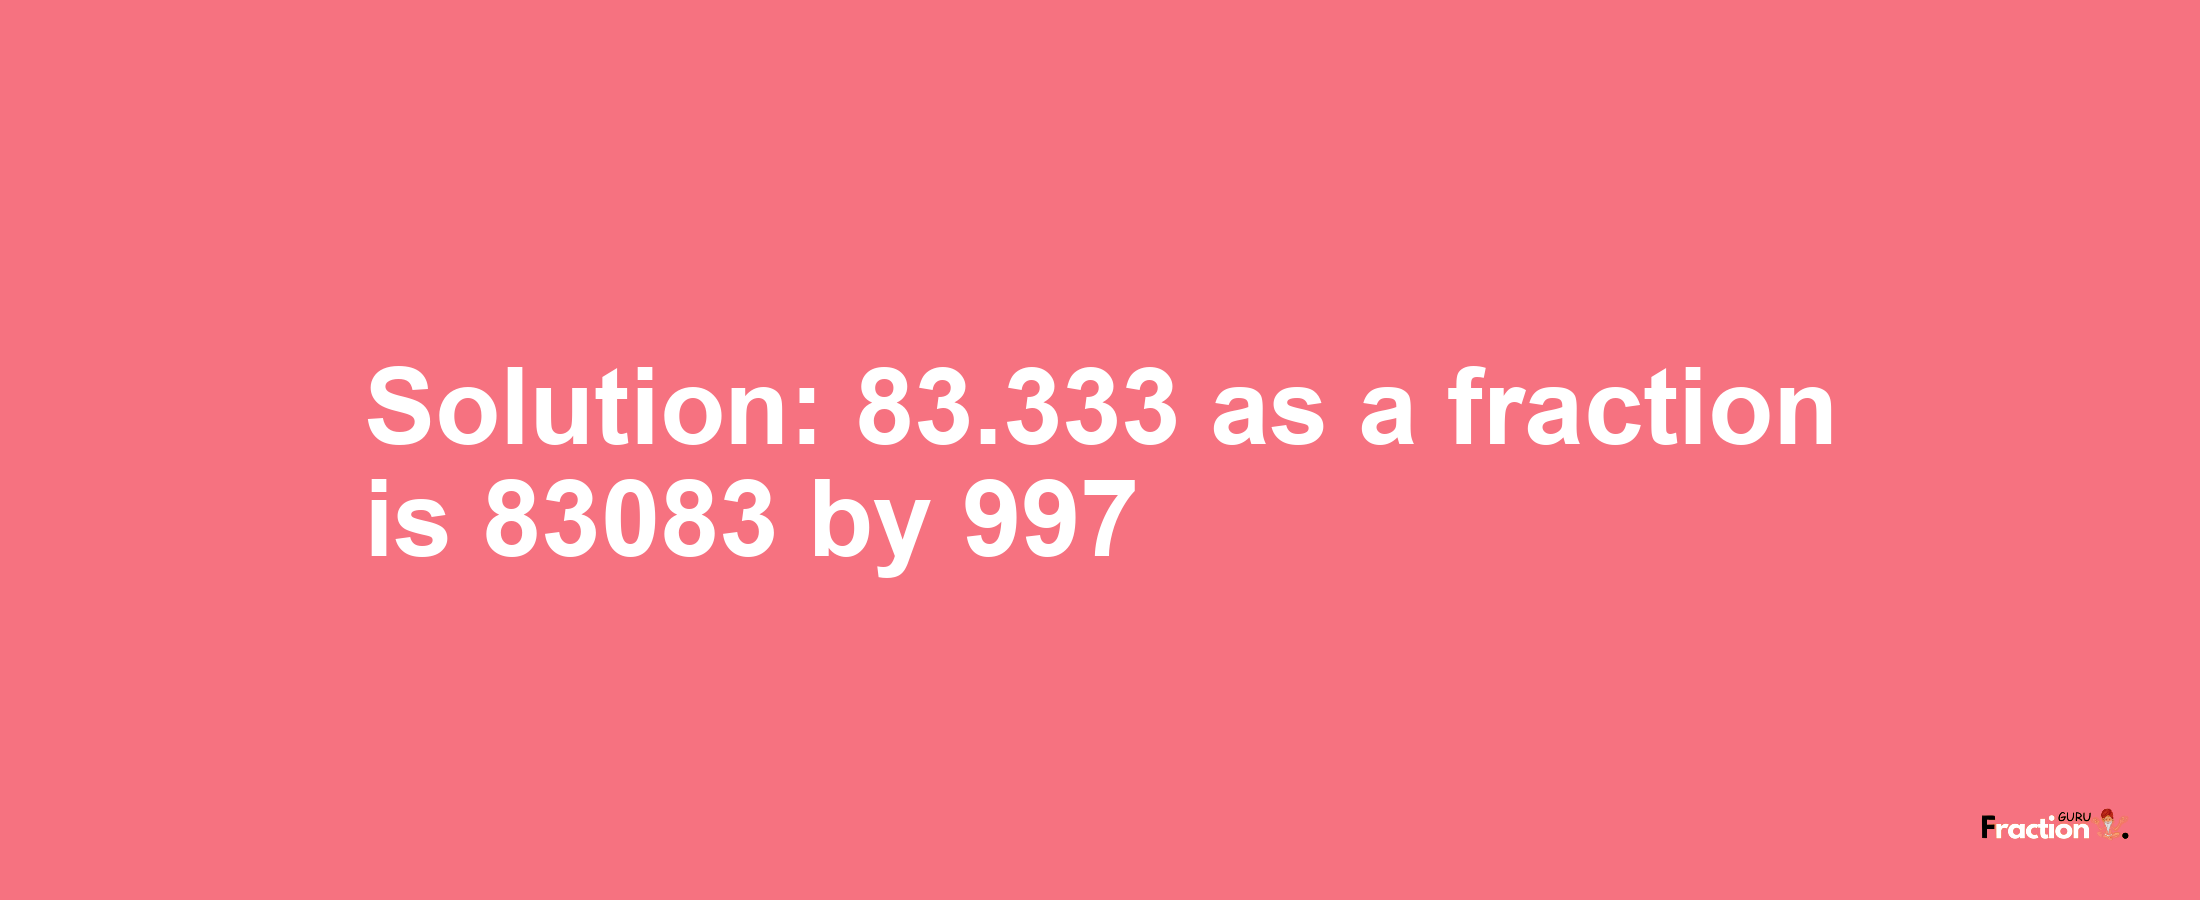 Solution:83.333 as a fraction is 83083/997